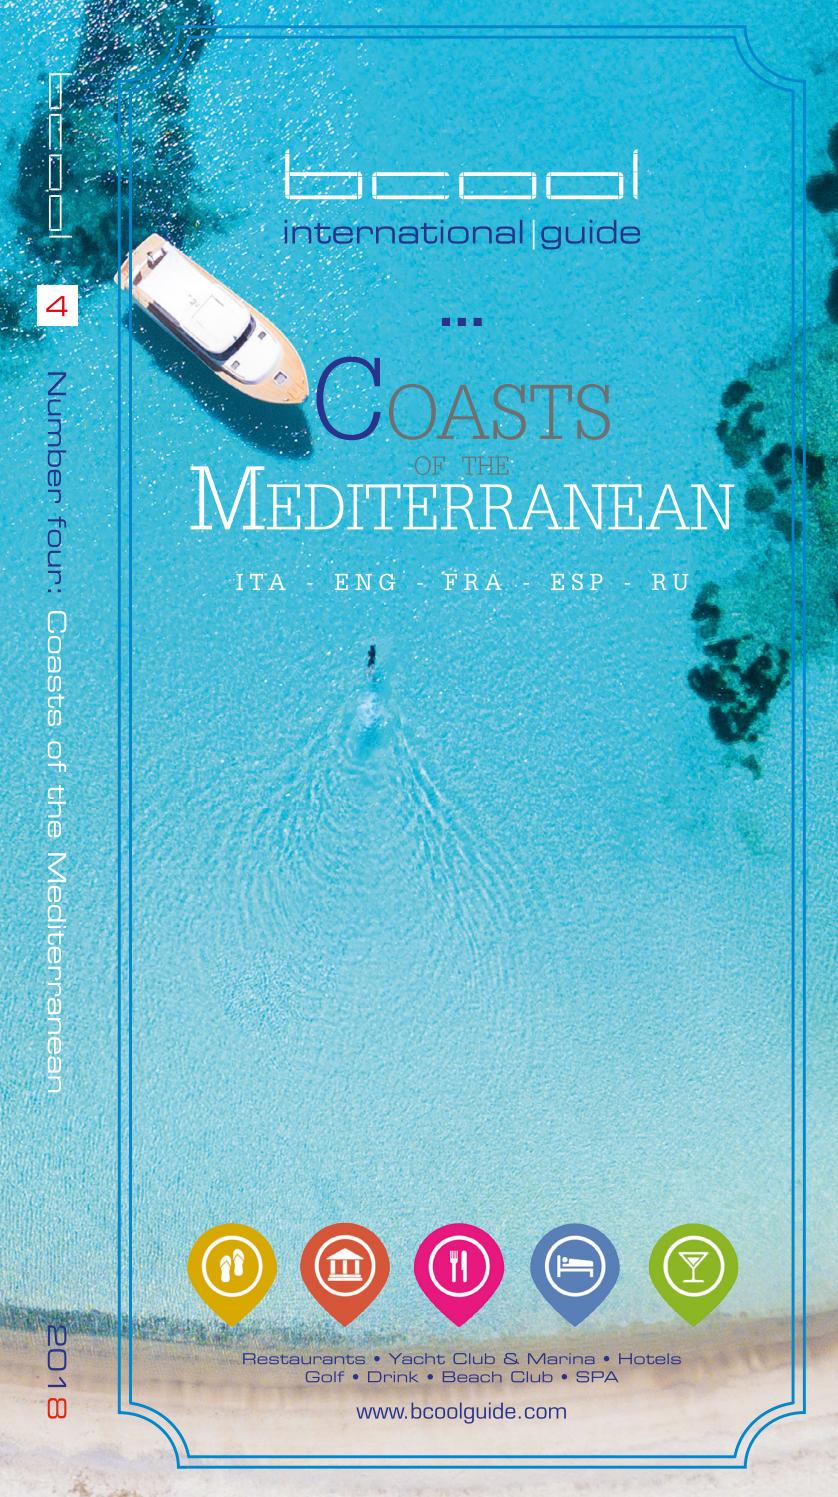 Ensemble De Jardin Inspirant 2018 Bcool Guide "coasts Of the Mediterrean" by Bcool City